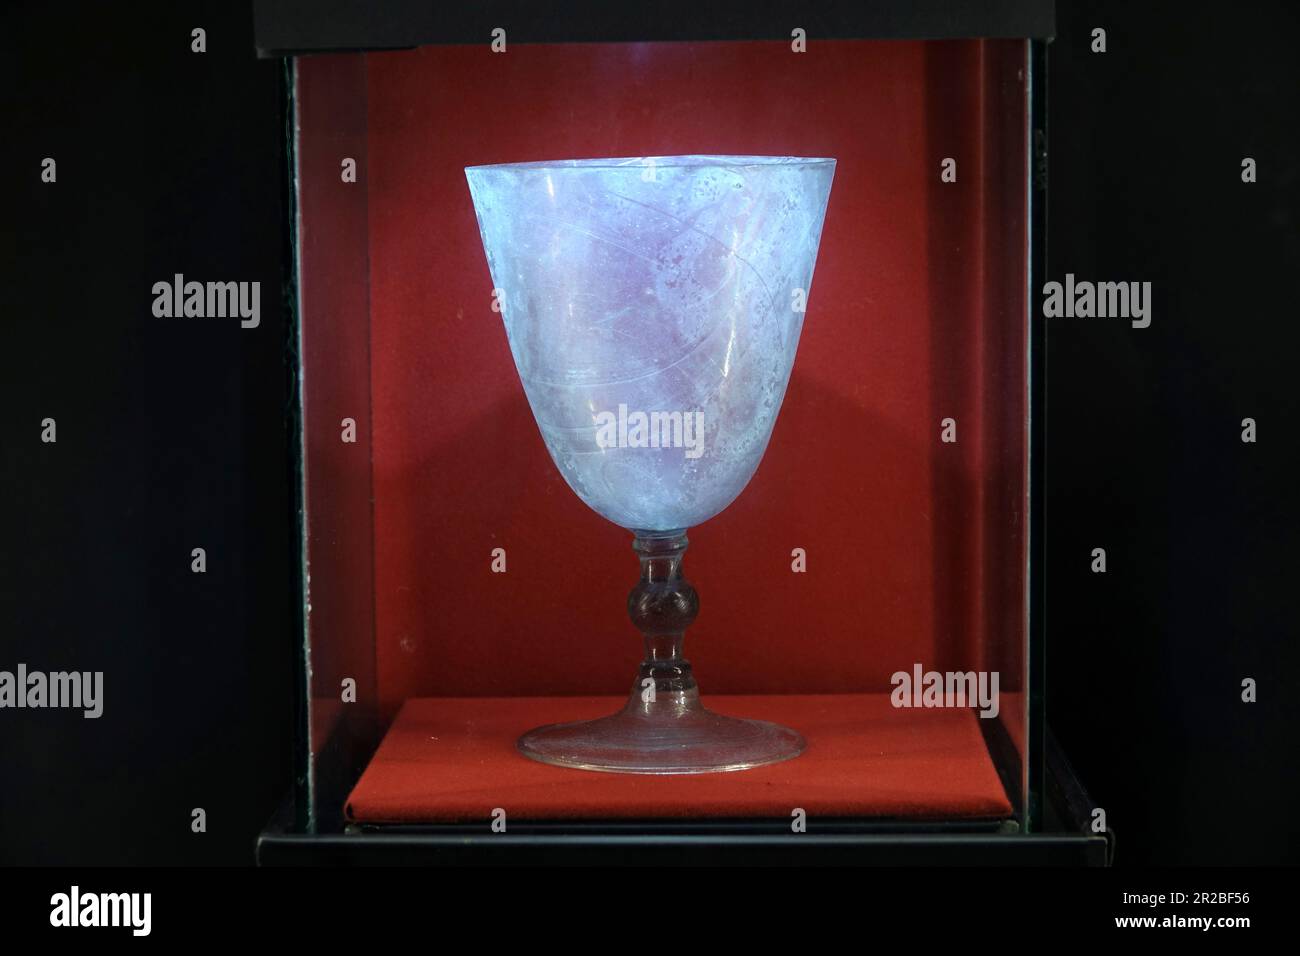 Close-up image of the glass chalice found in Berceto Cathedral that may be the Holy Grail (Saint Graal, Graal, Greal). Berceto, Parma, Emilia Romagna, Stock Photo